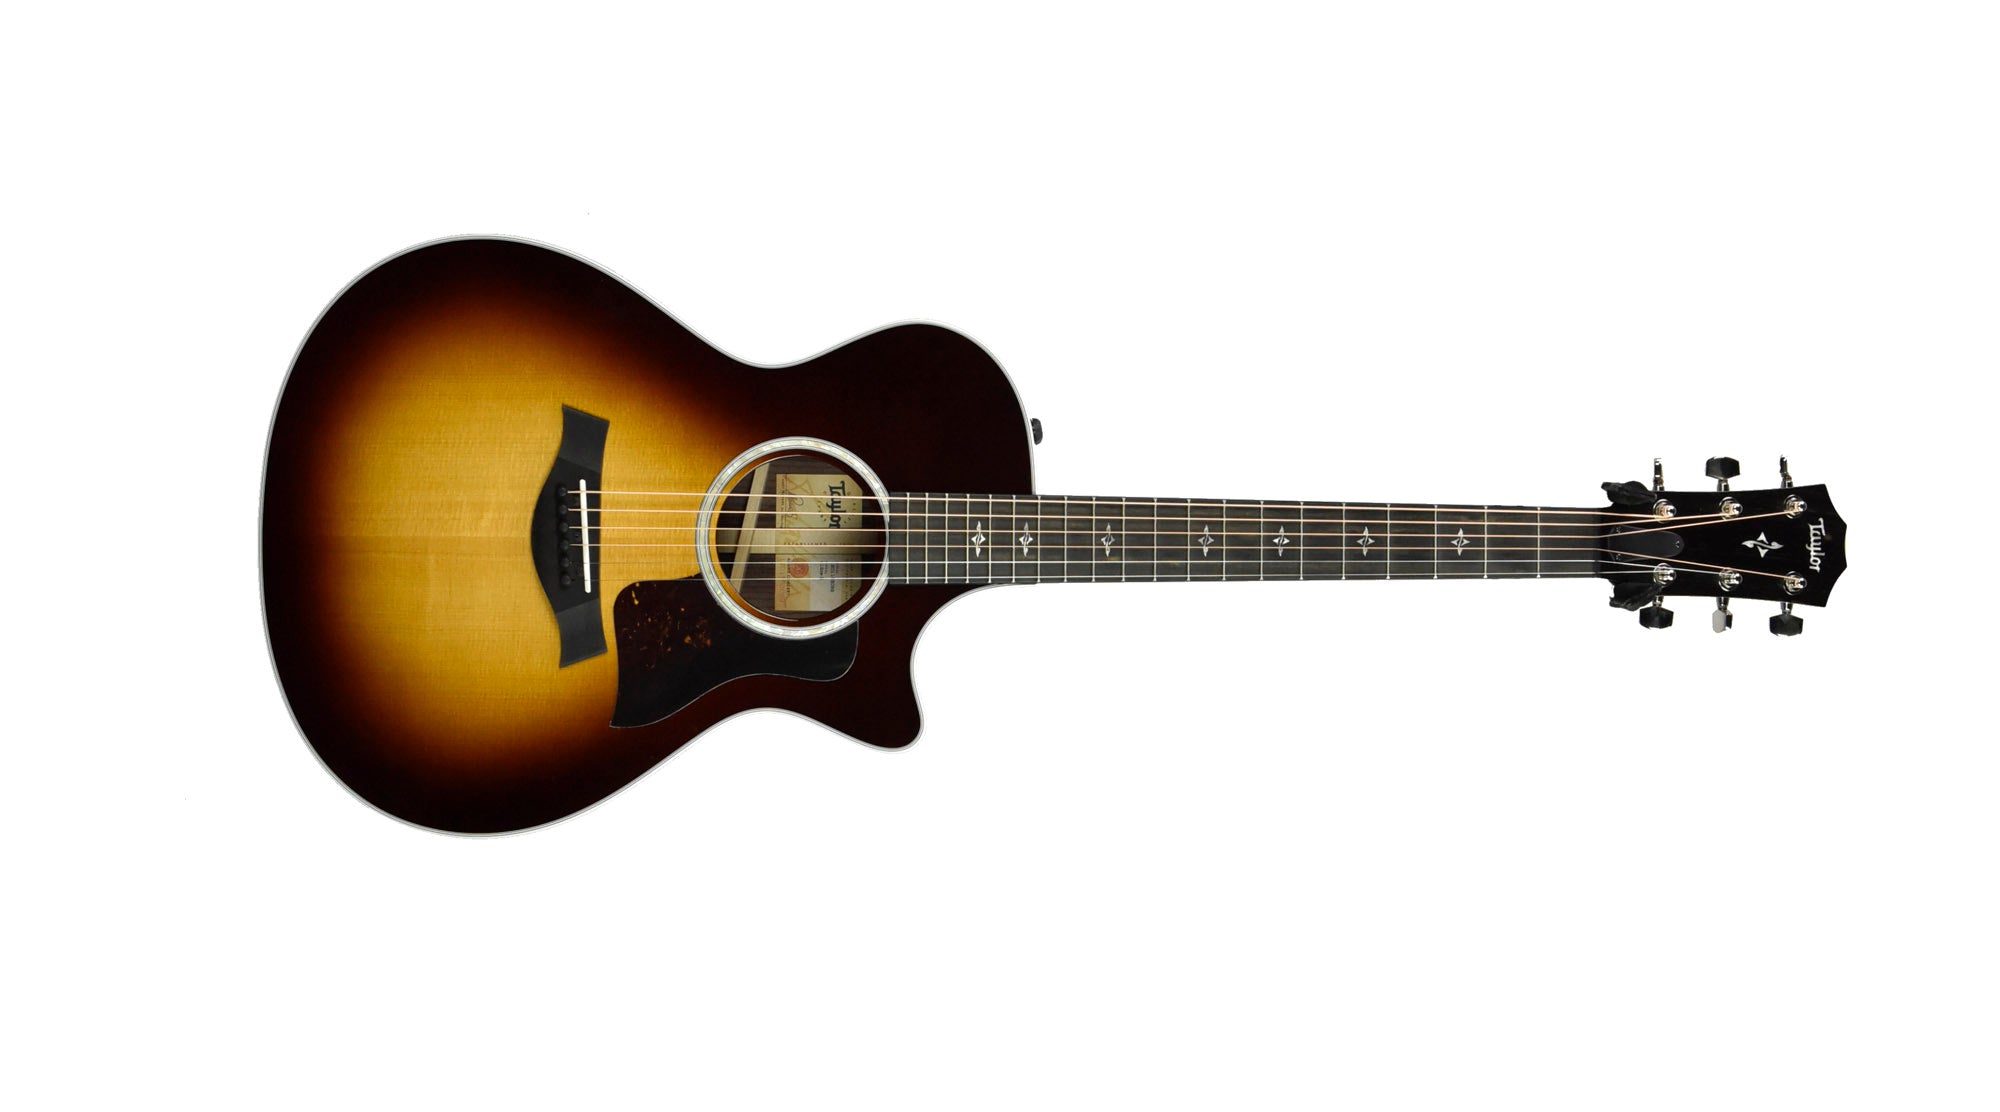 Taylor 412ce-R Acoustic-Electric Guitar in Tobacco Sunburst